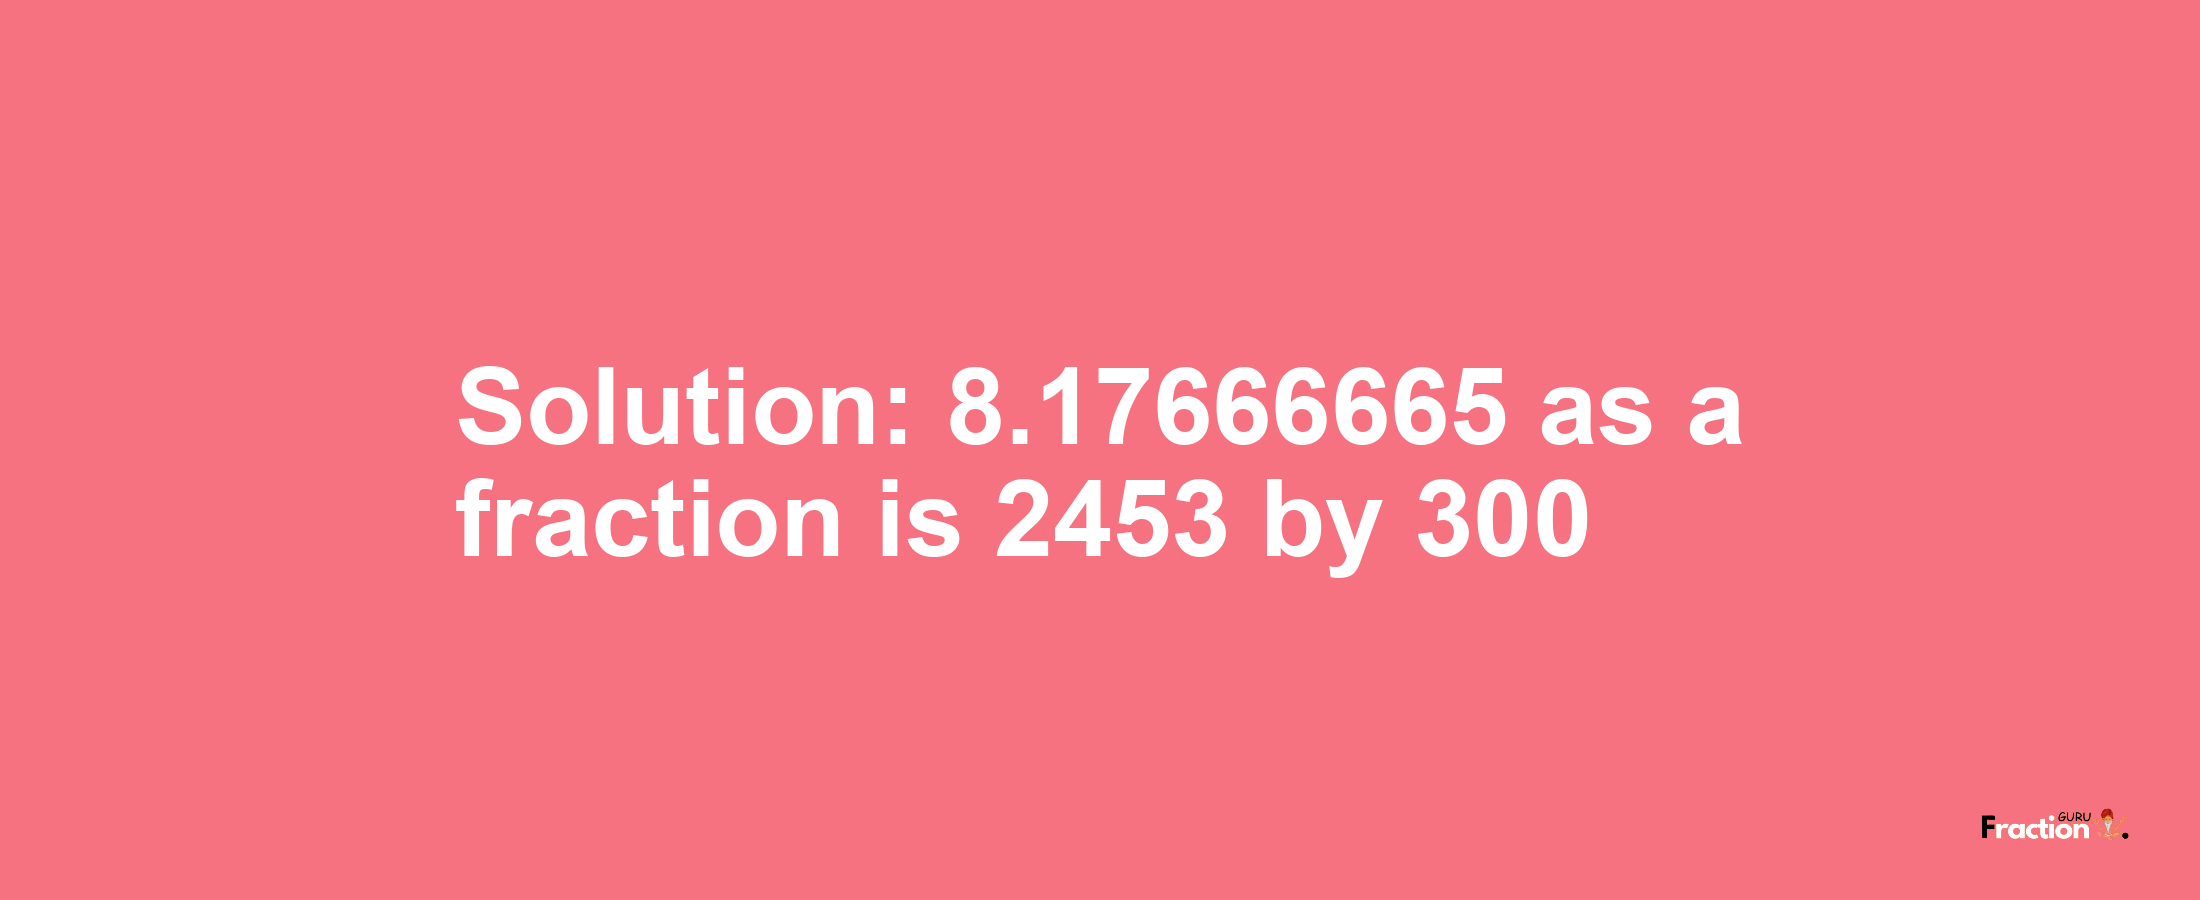 Solution:8.17666665 as a fraction is 2453/300